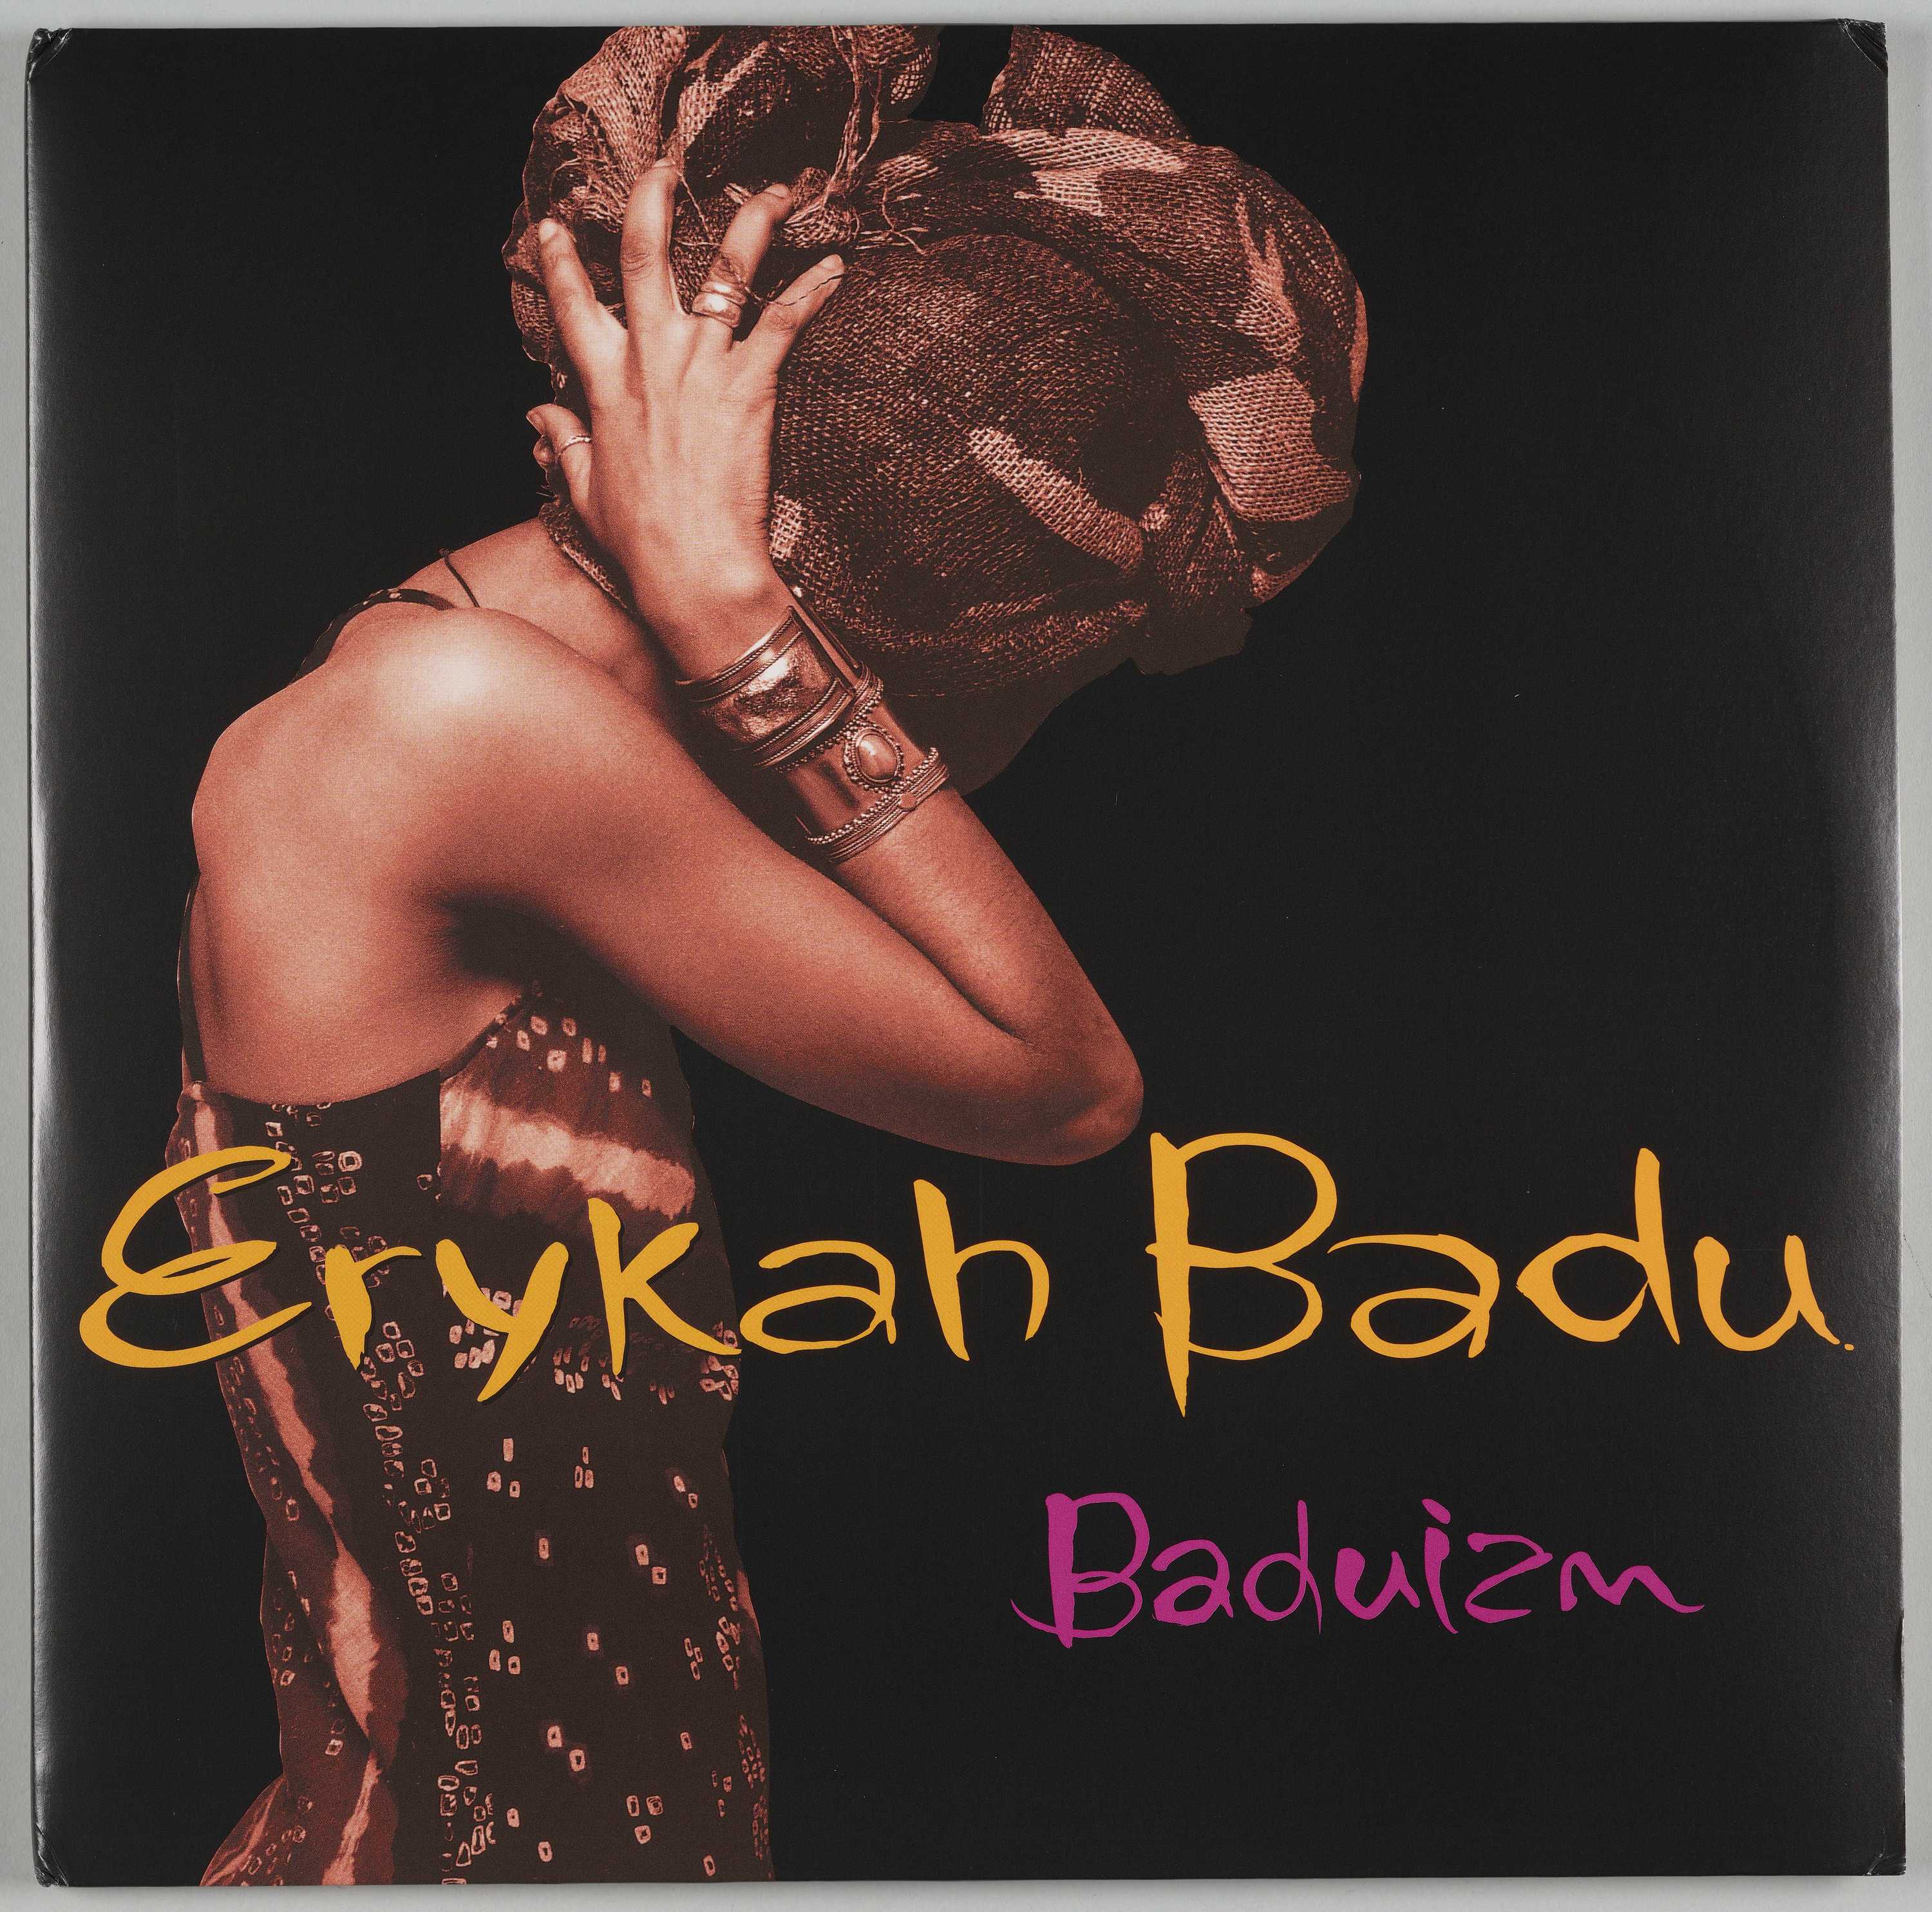 The album cover for Baduizm featuring her a side view portrait of Erykah Badu and vibrant typography.